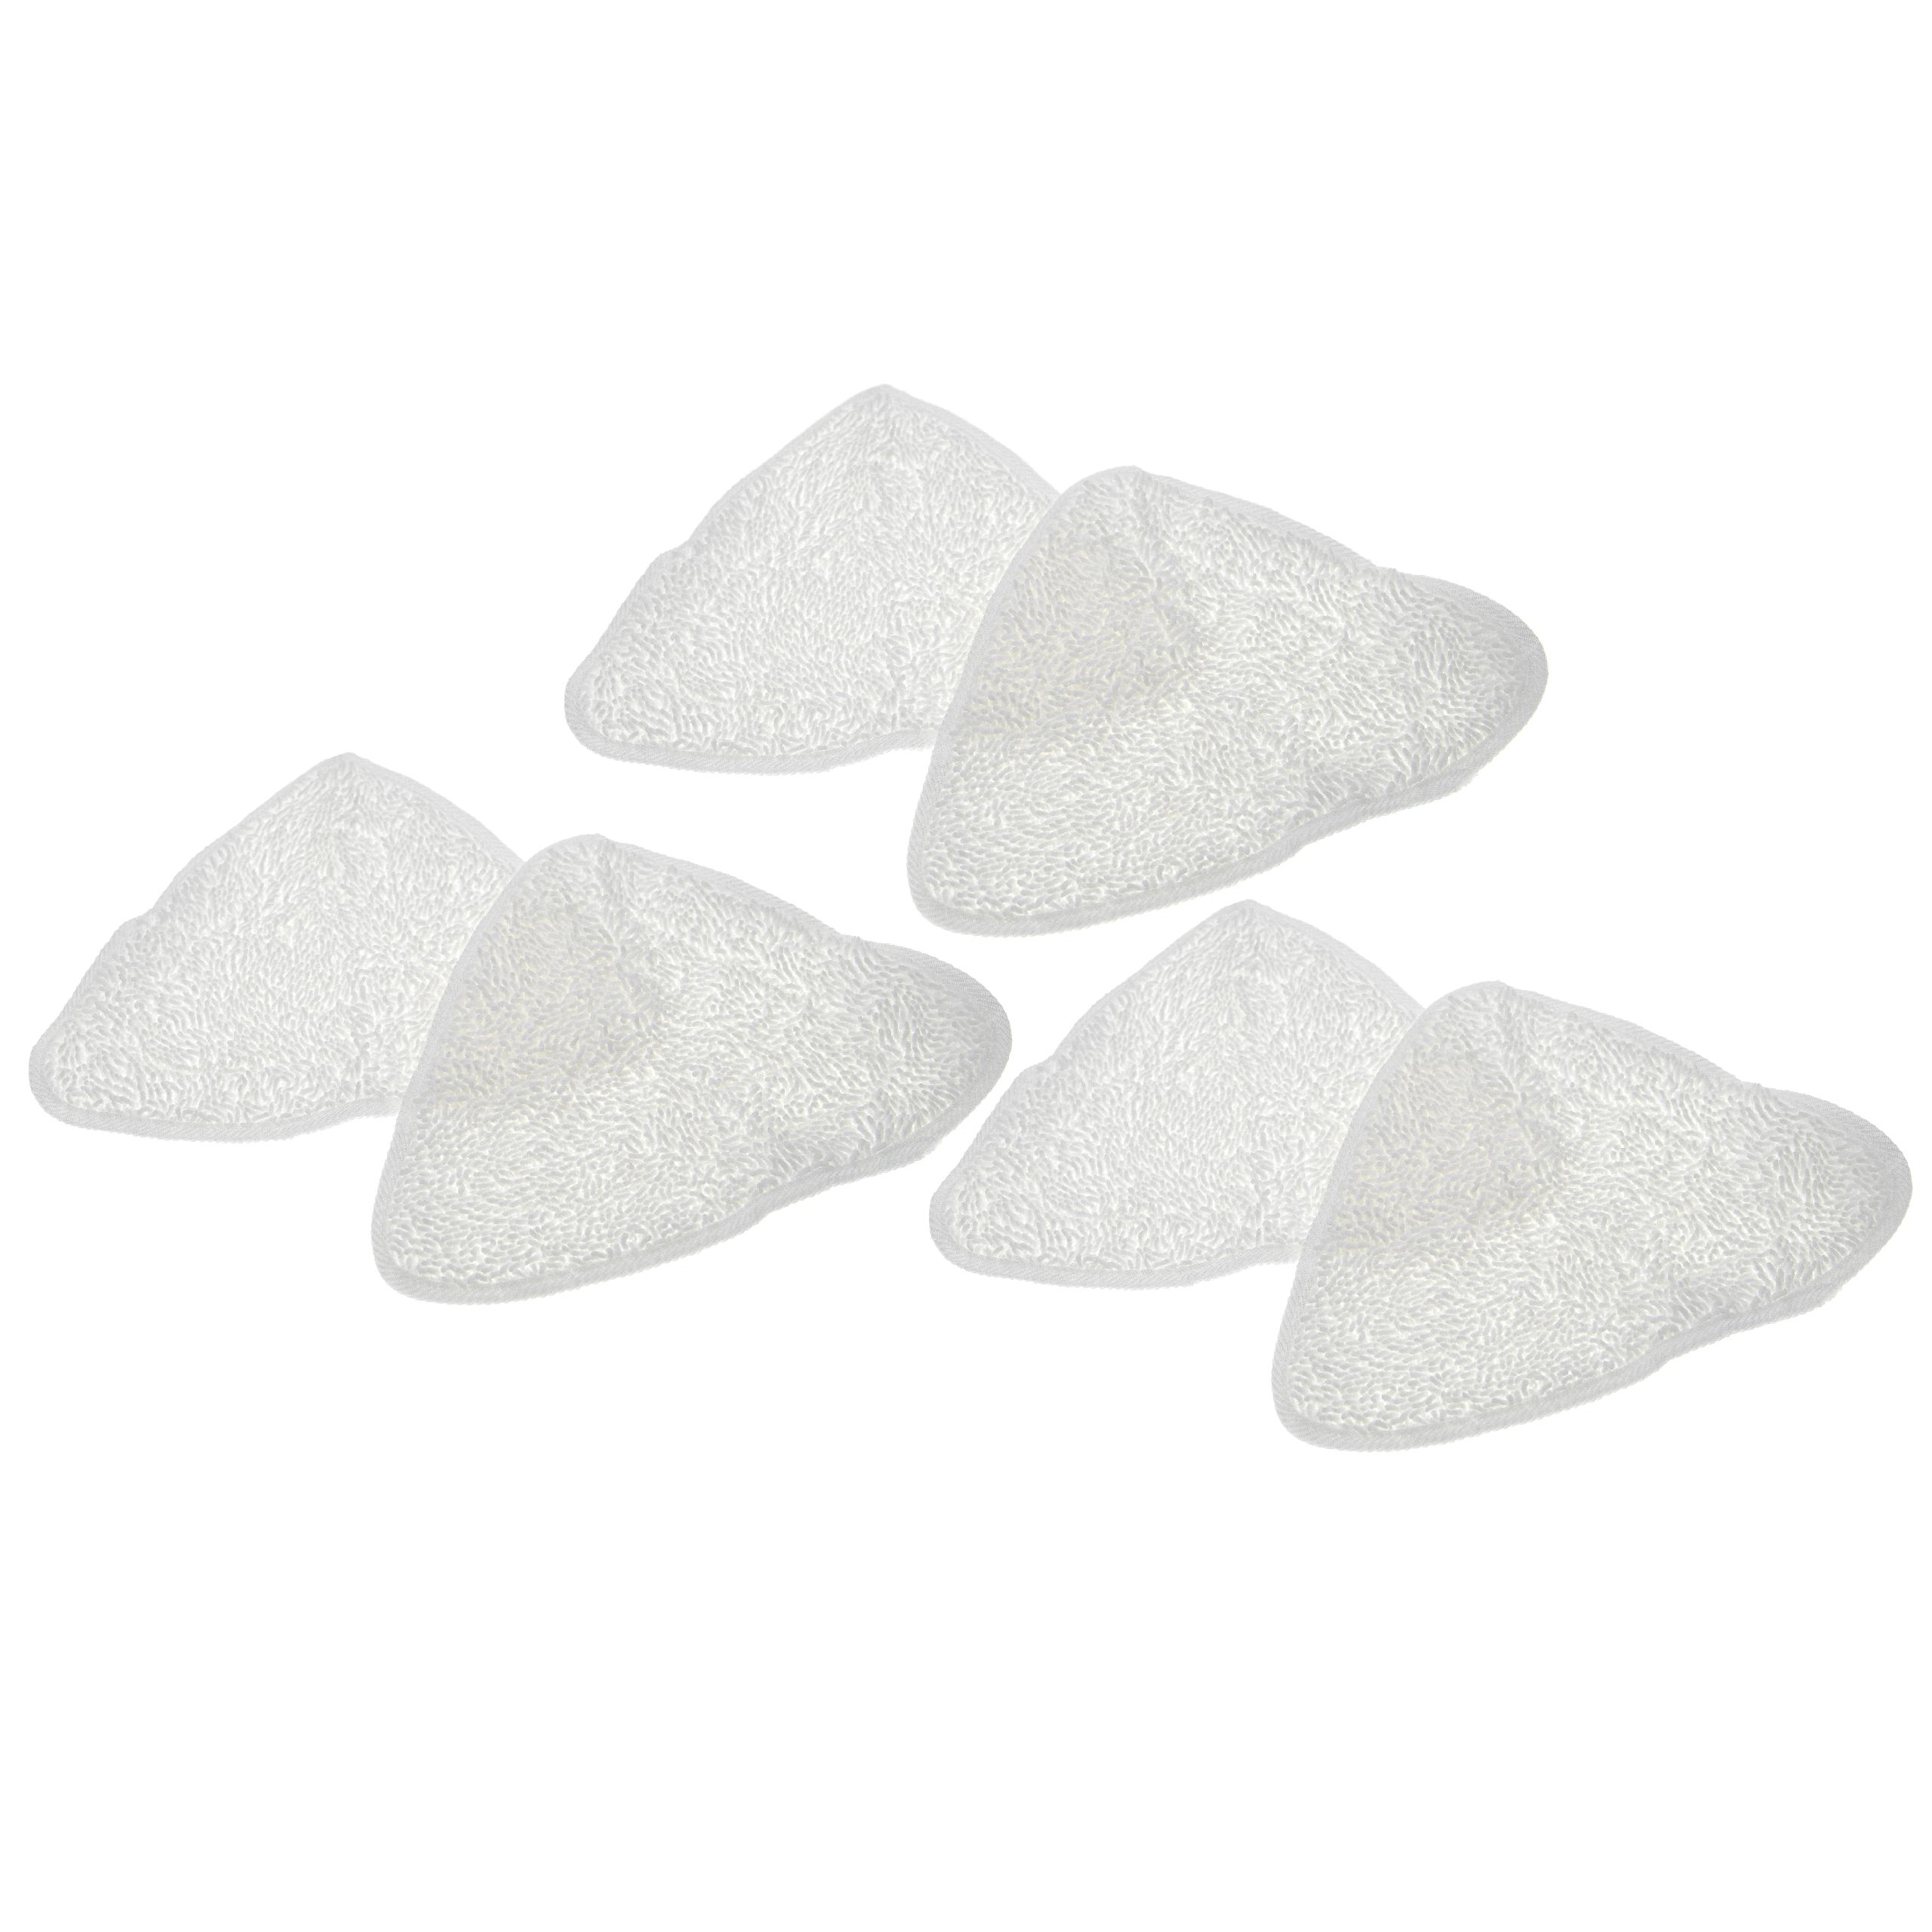 6x Cleaning Pad replaces Vileda 146576 for ViledaHot Spray Steamer, Steam Mop - Microfibre White